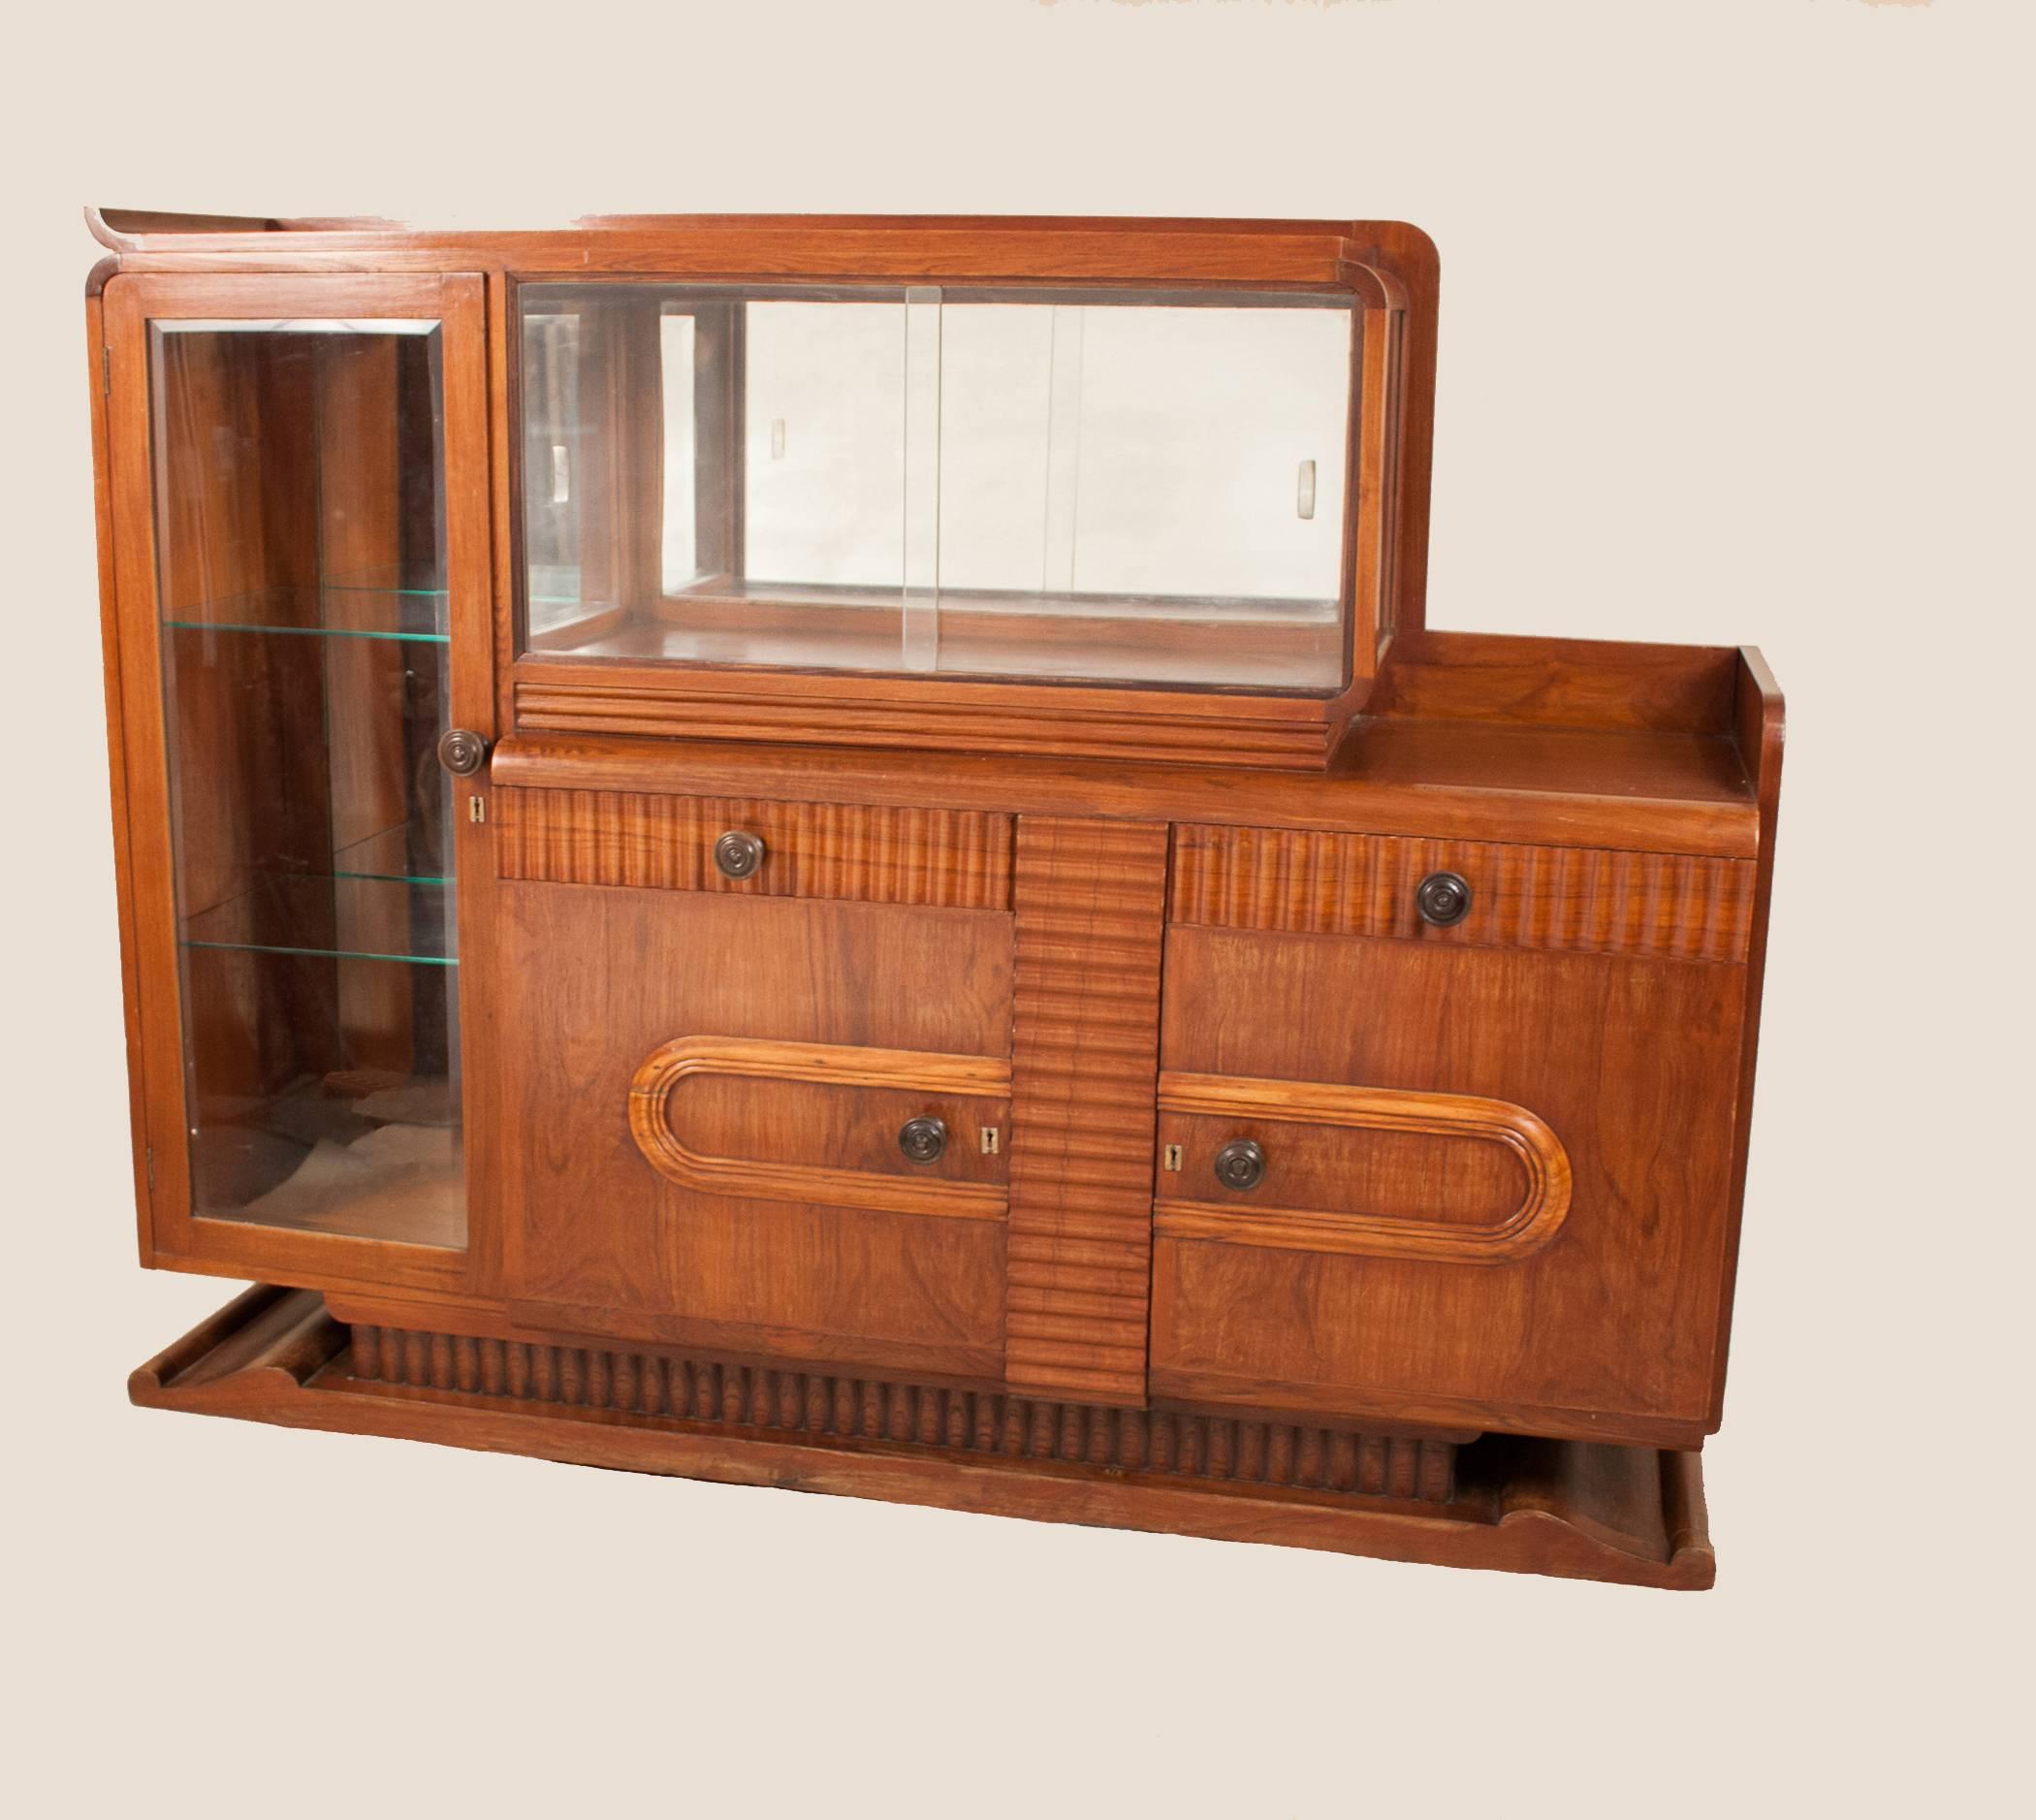 Possibilities abound for this grand 1930s Art Deco credenza handcrafted in India for a visiting French diplomat. The piece is constructed from teak wood, with rosewood accents, and features vertical and horizontal glass display cases with mirrored